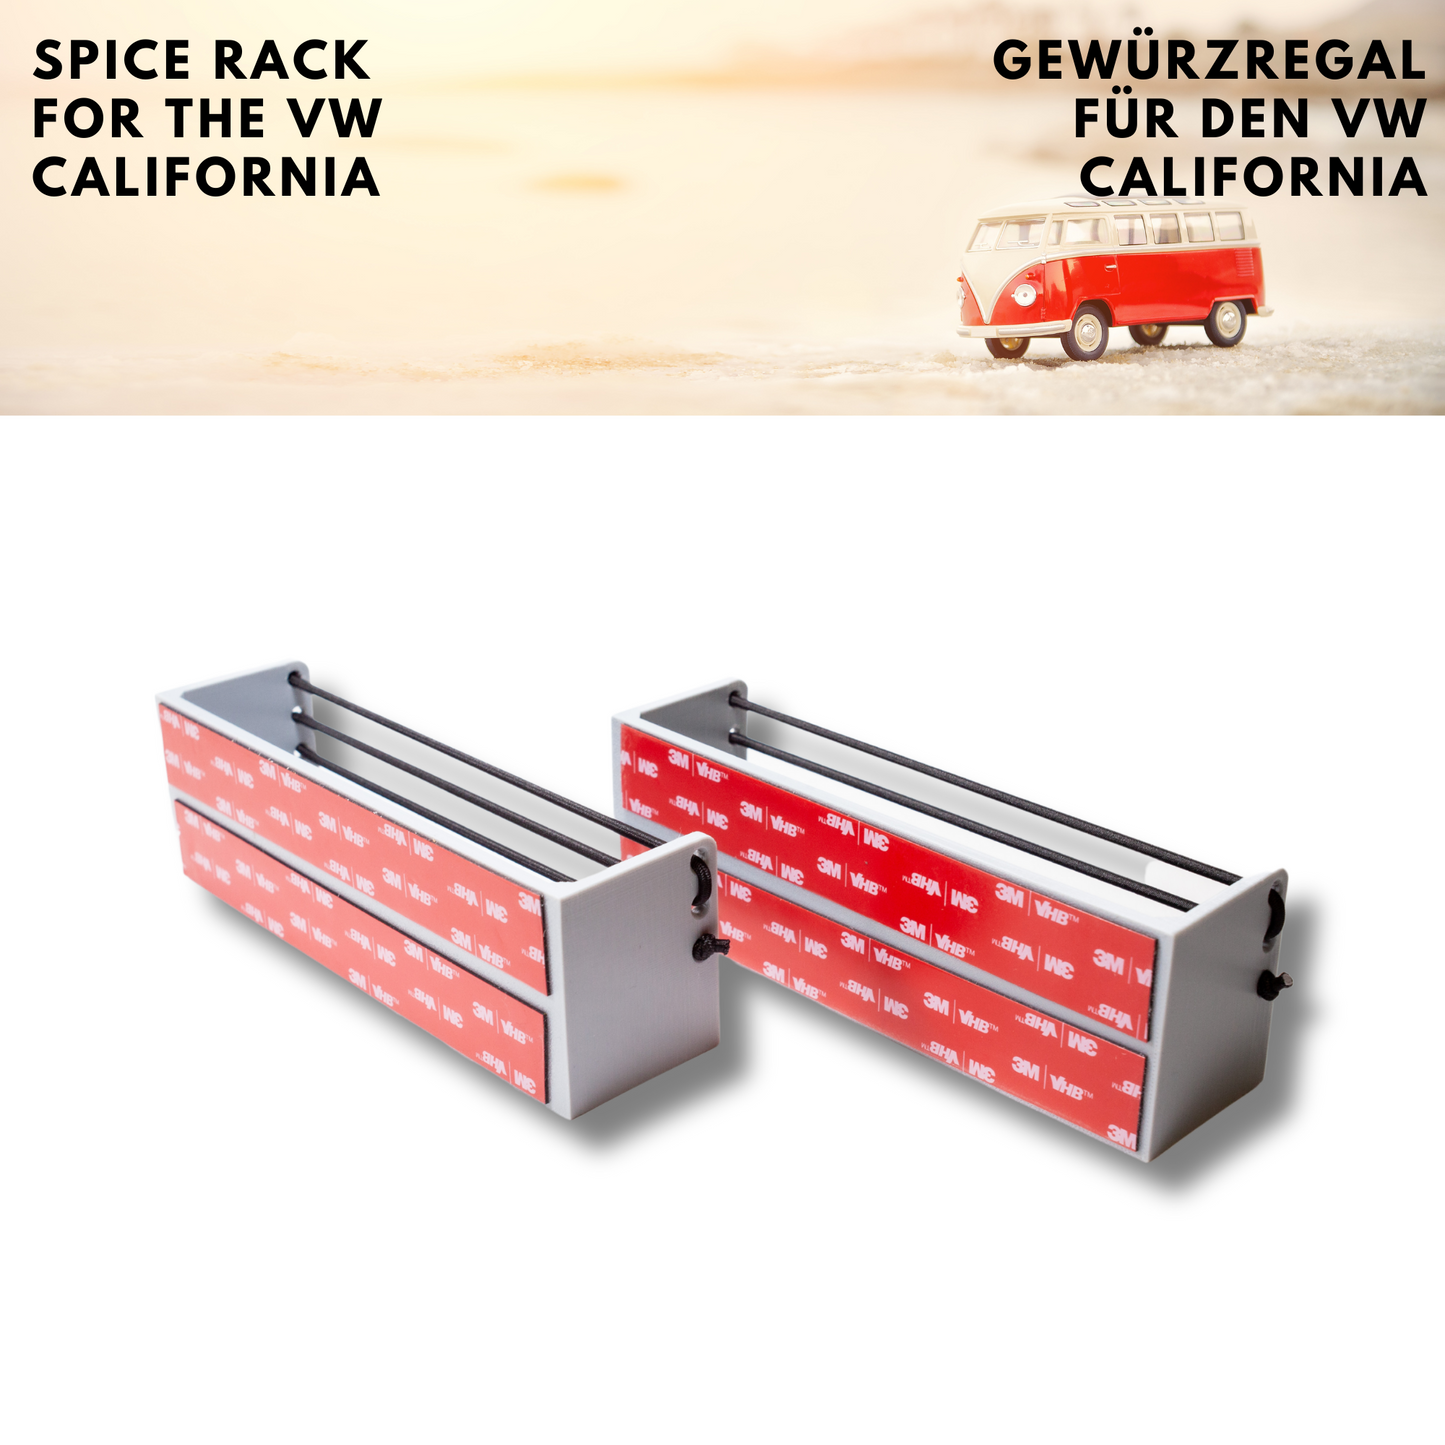 VW California T6.1 spice rack to stick on the existing shelf in the blackout of the small window